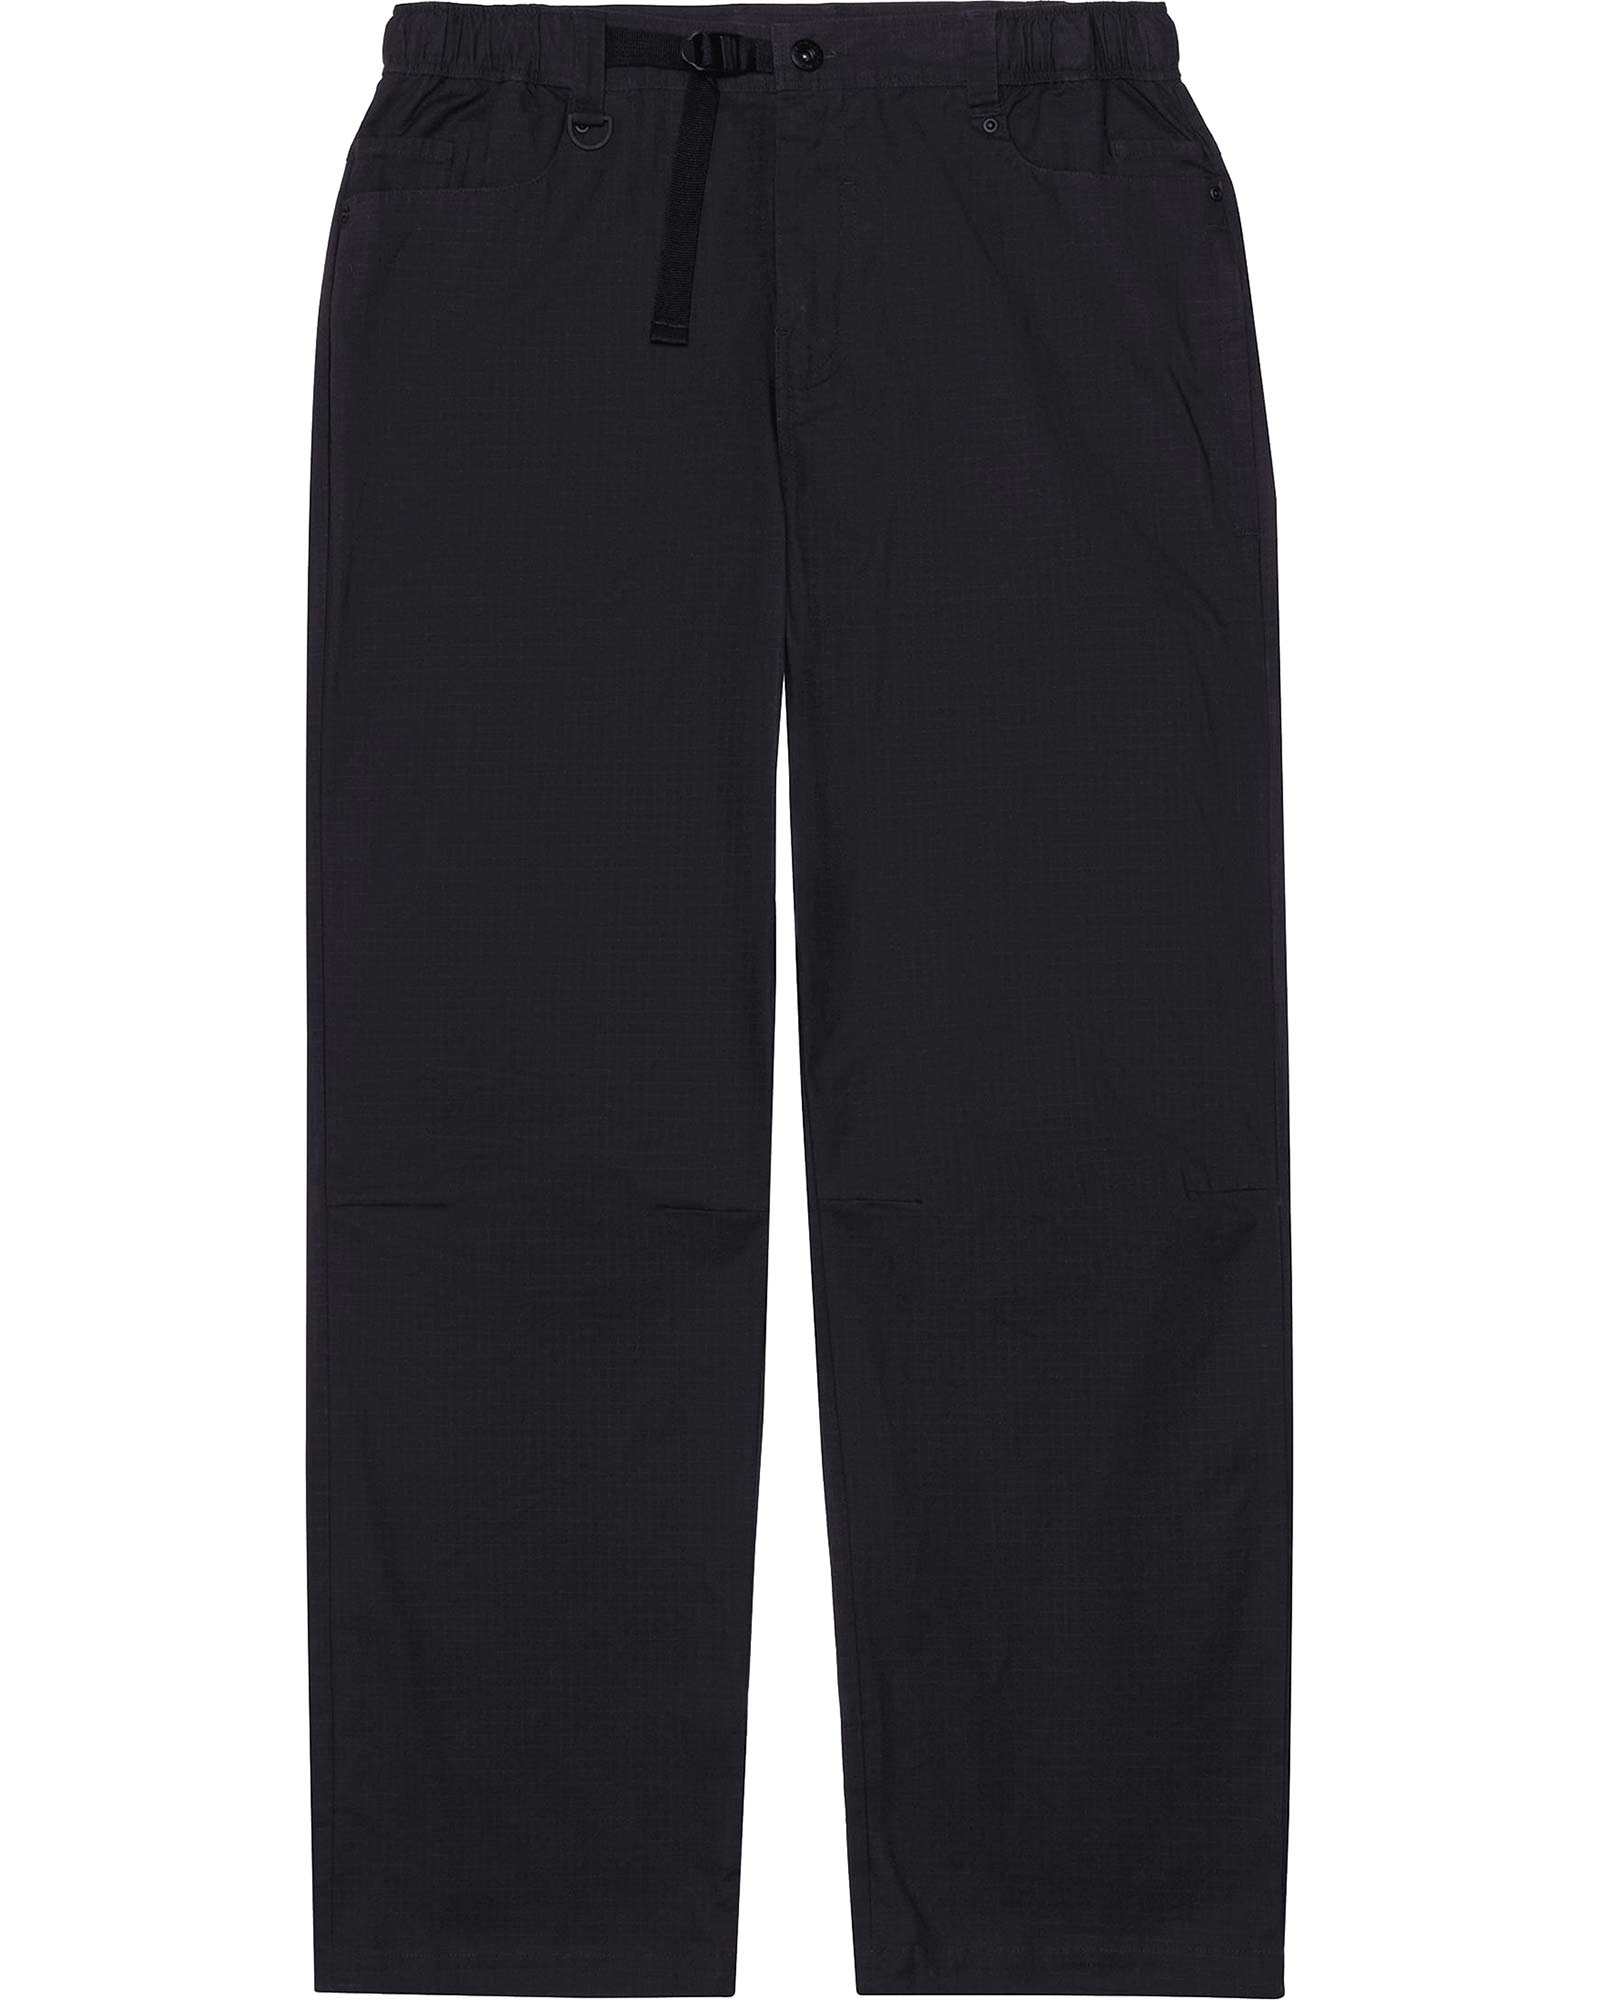 686 Men's Cruiser Trousers - Wide Fit